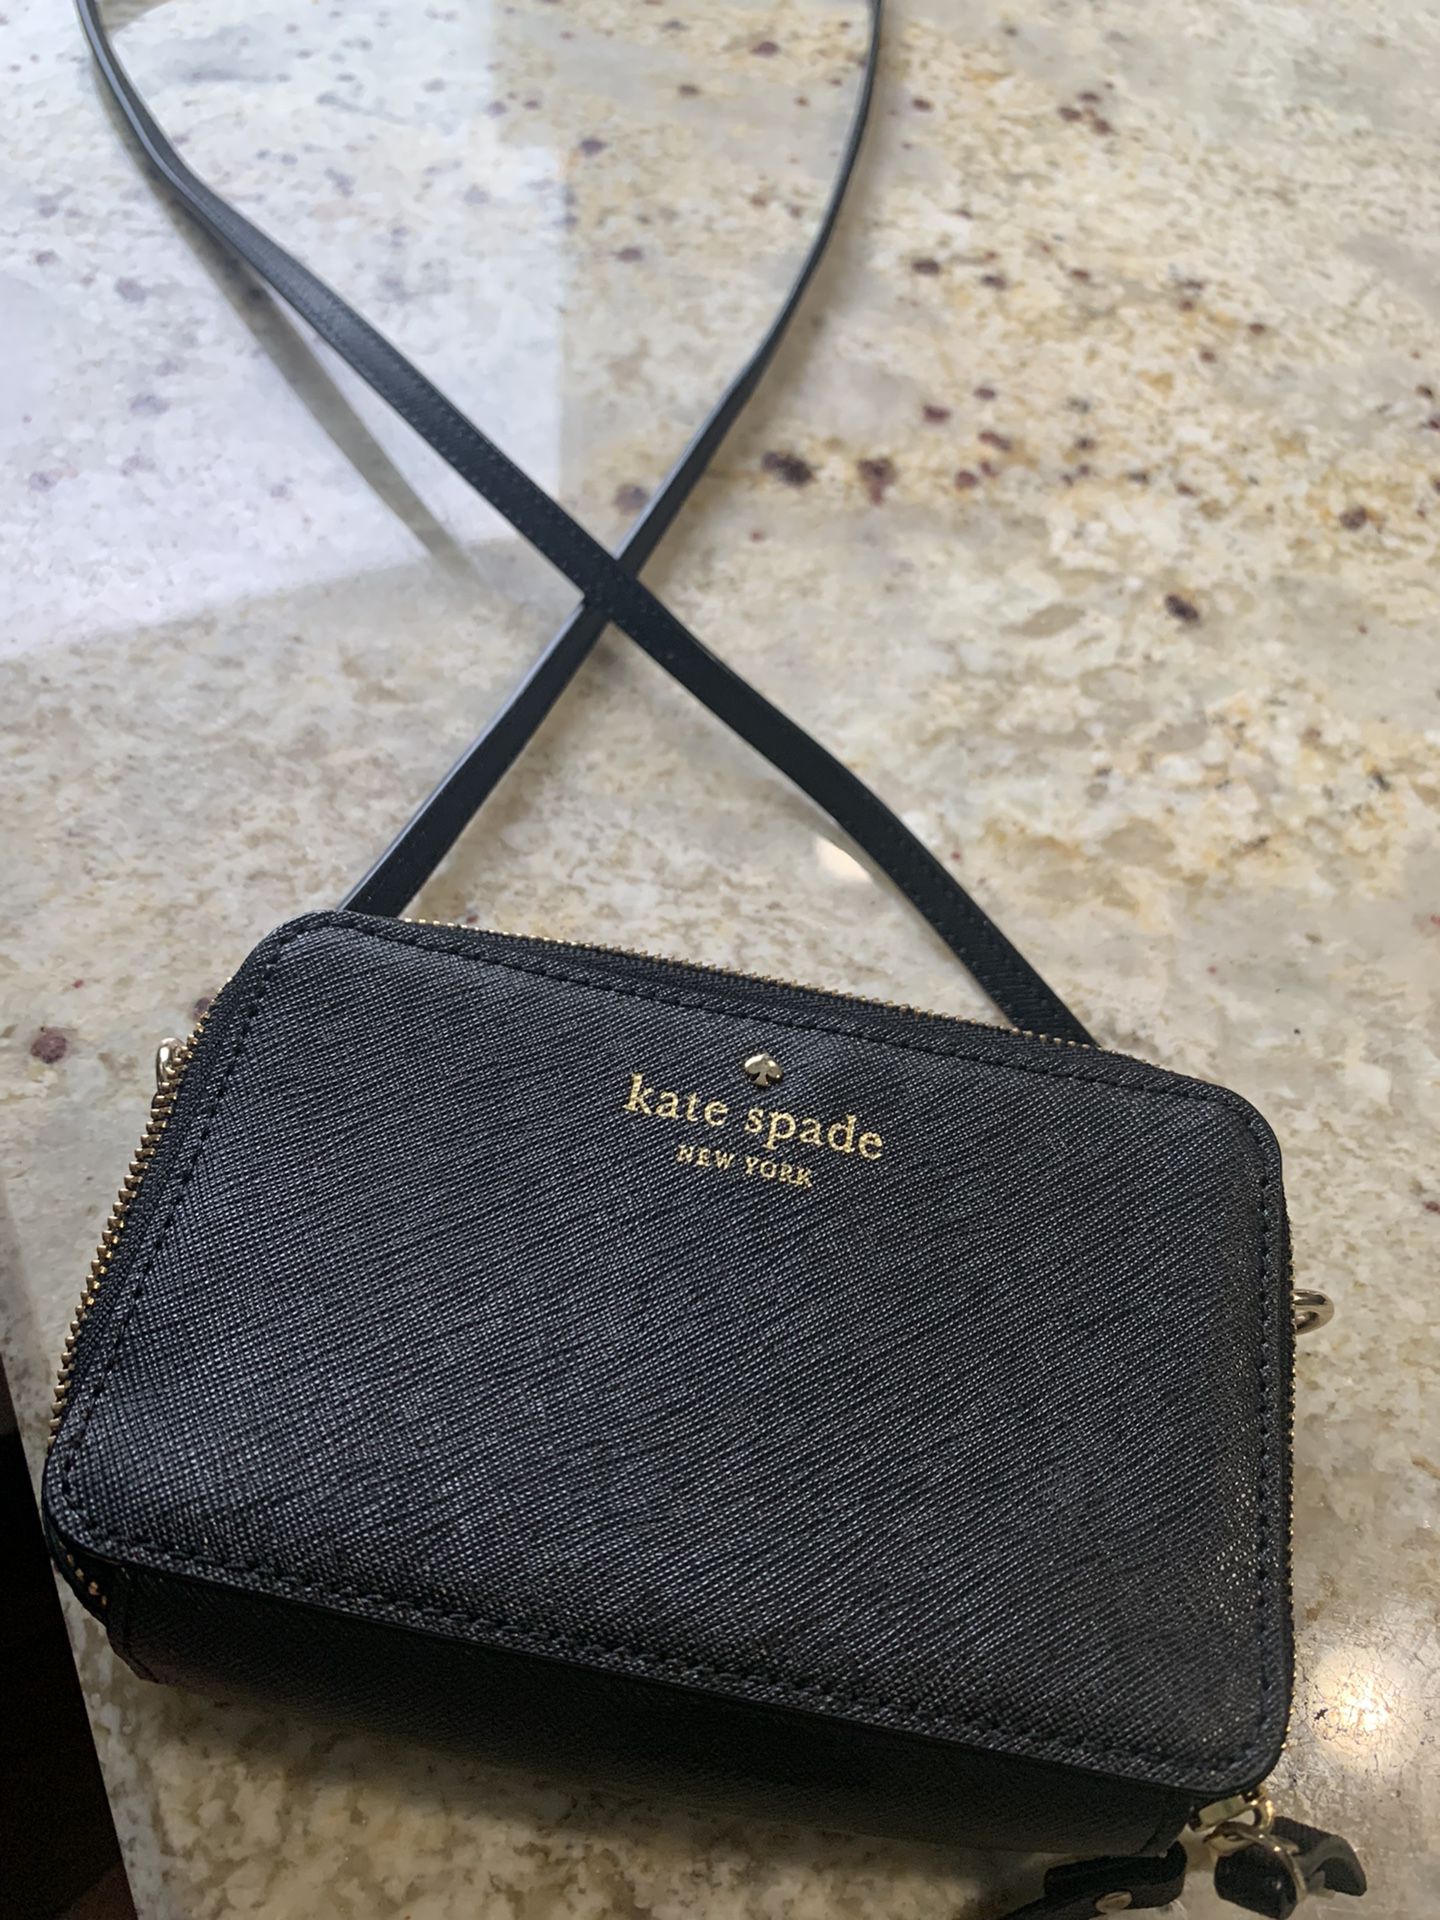 Woman Bag for Sale in South Orange, NJ - OfferUp